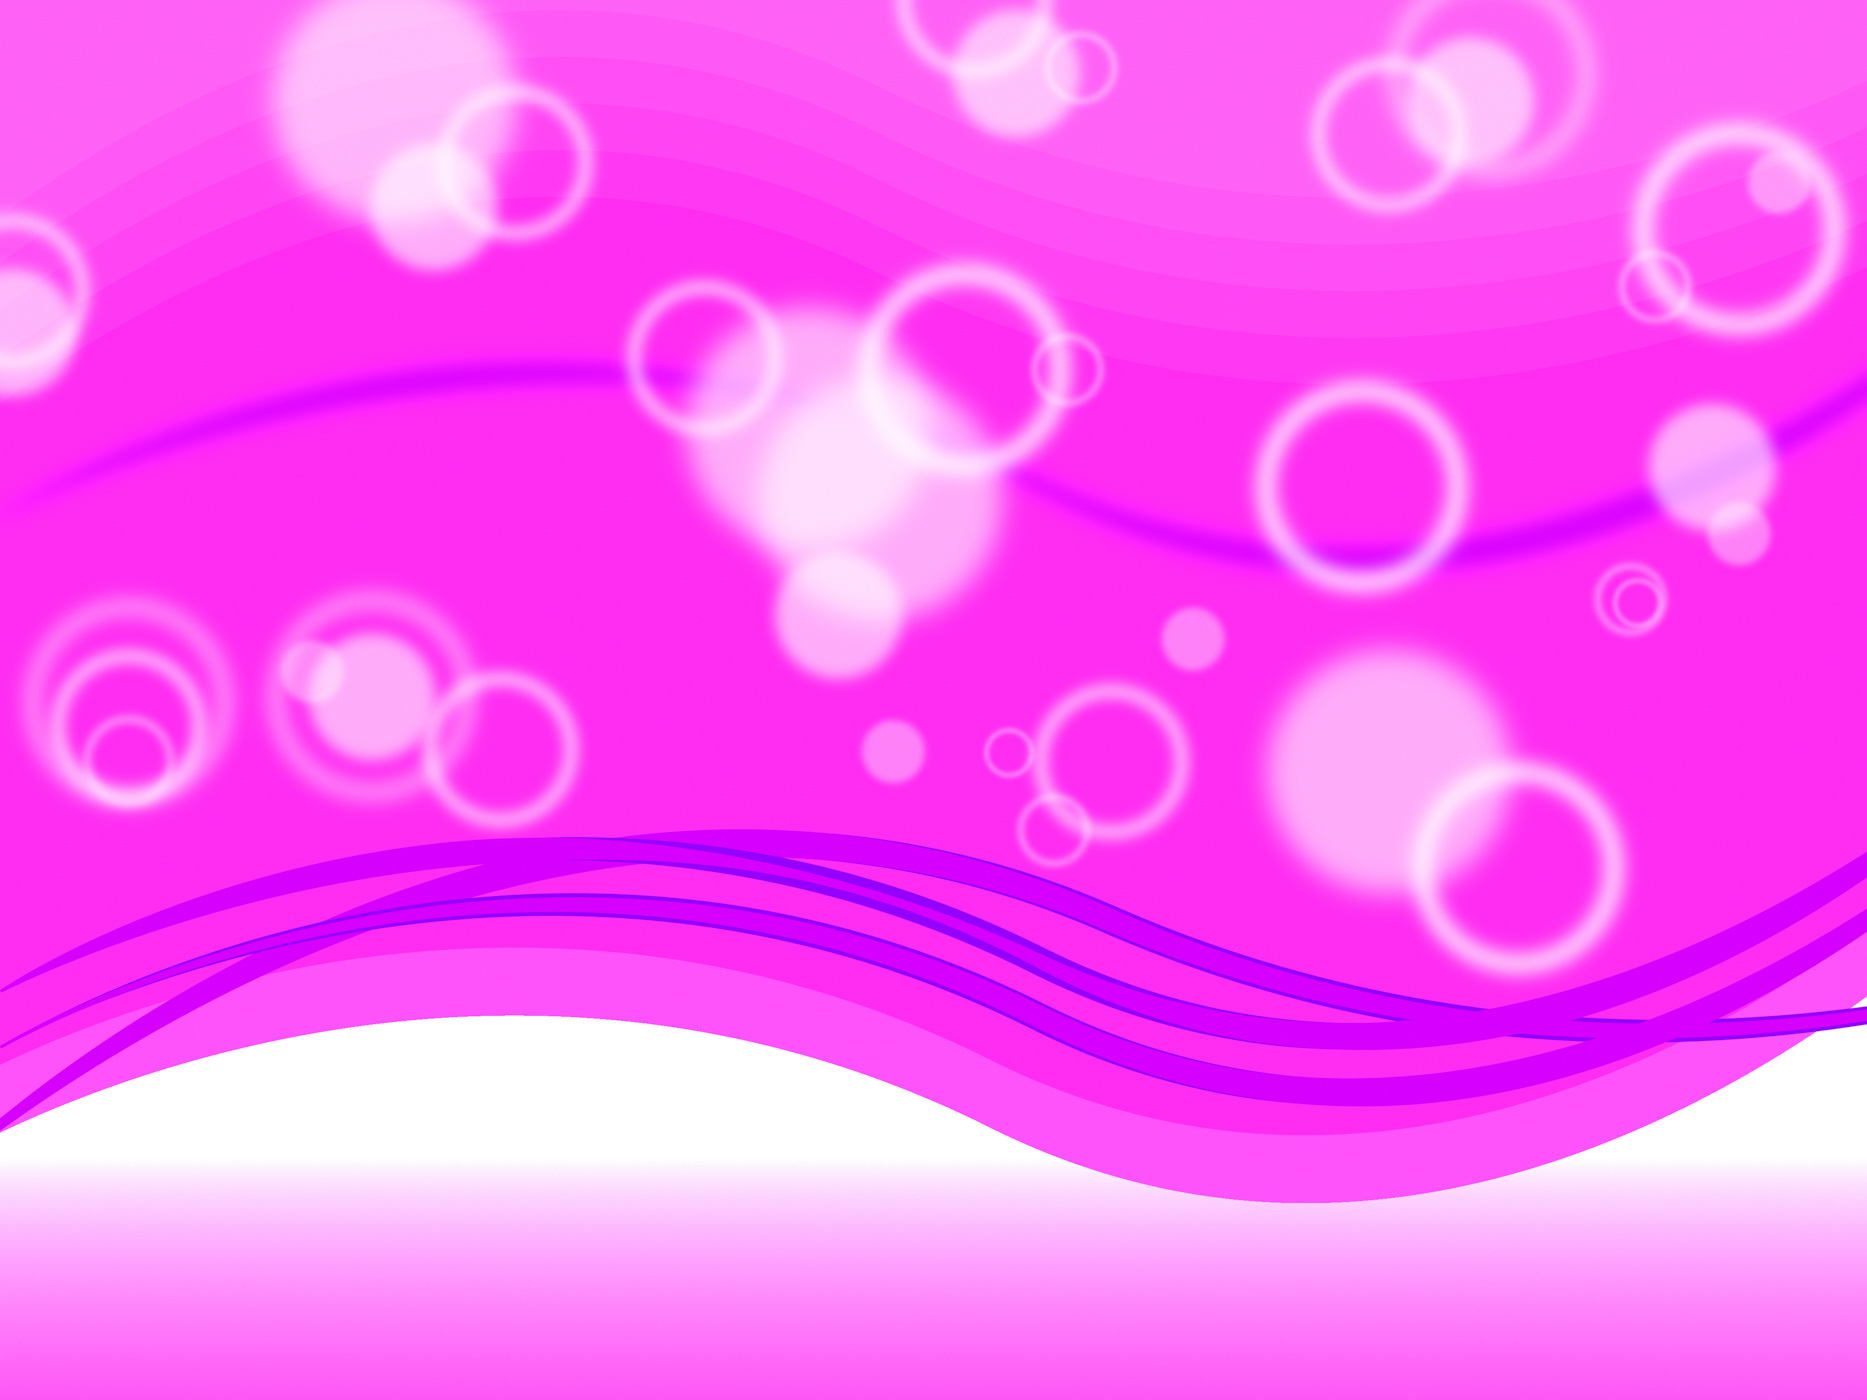 Pink bubbles background shows circles and ripples photo